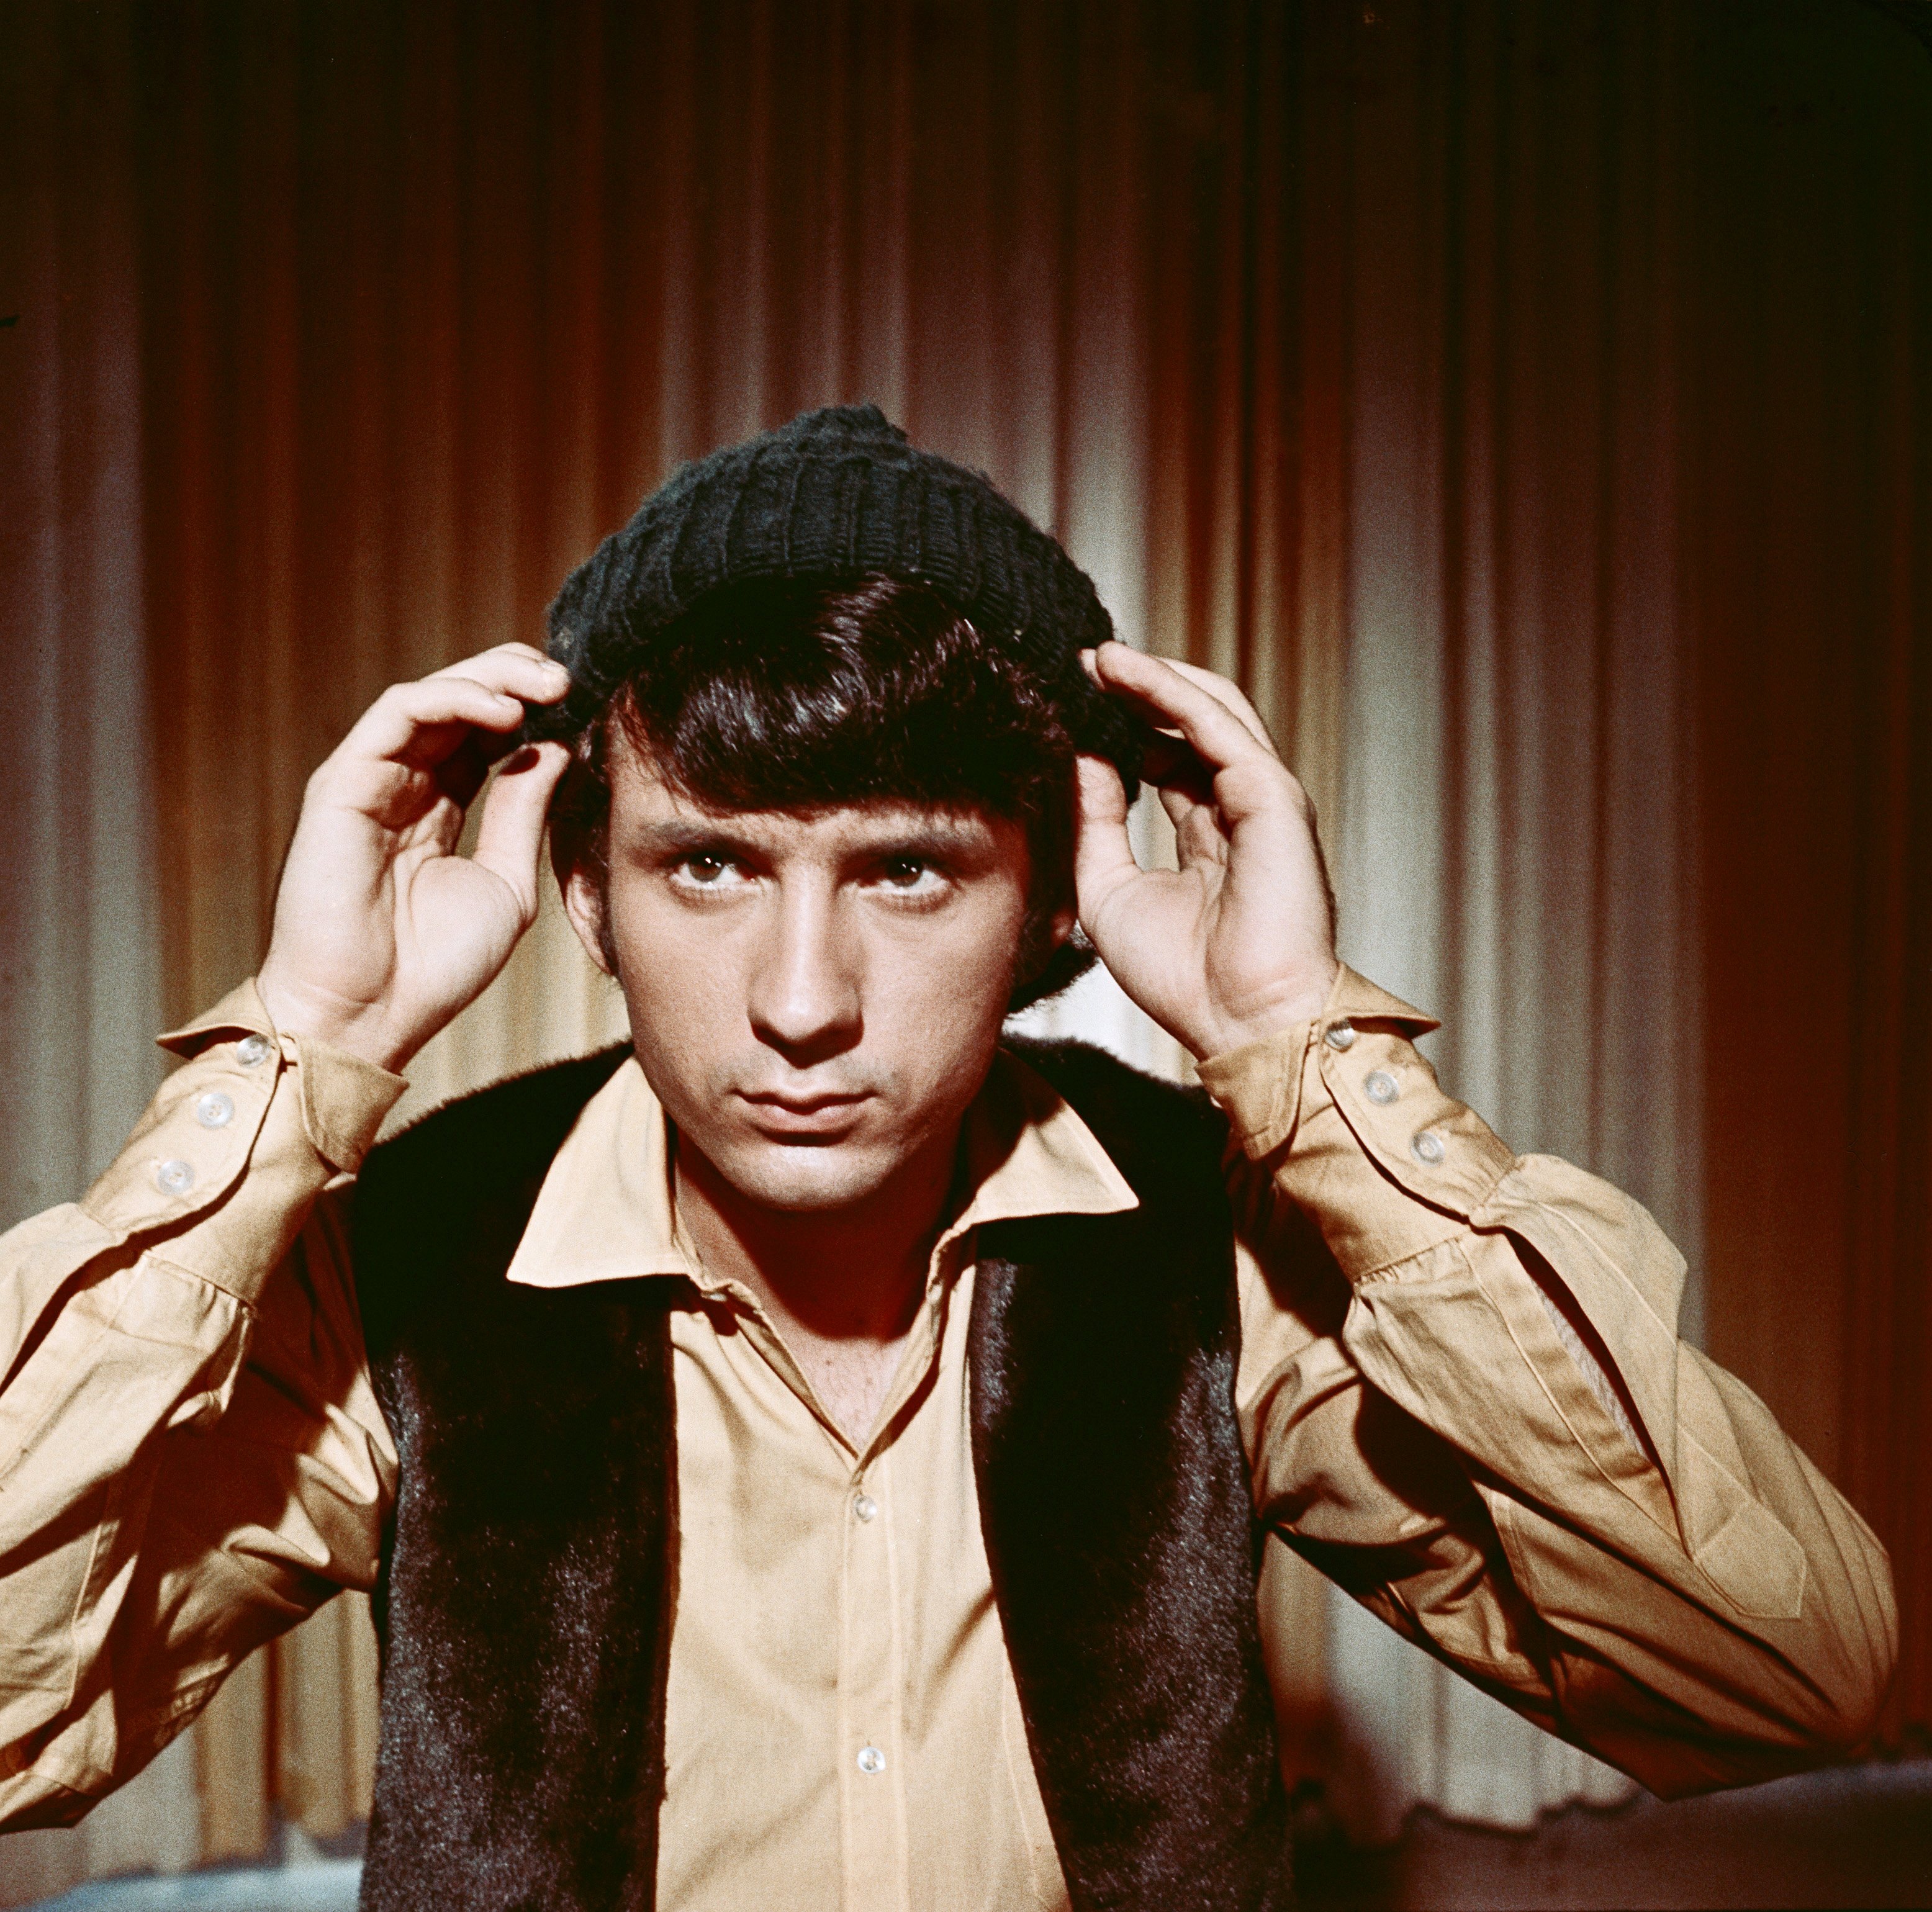 Mike Nesmith wearing a hat